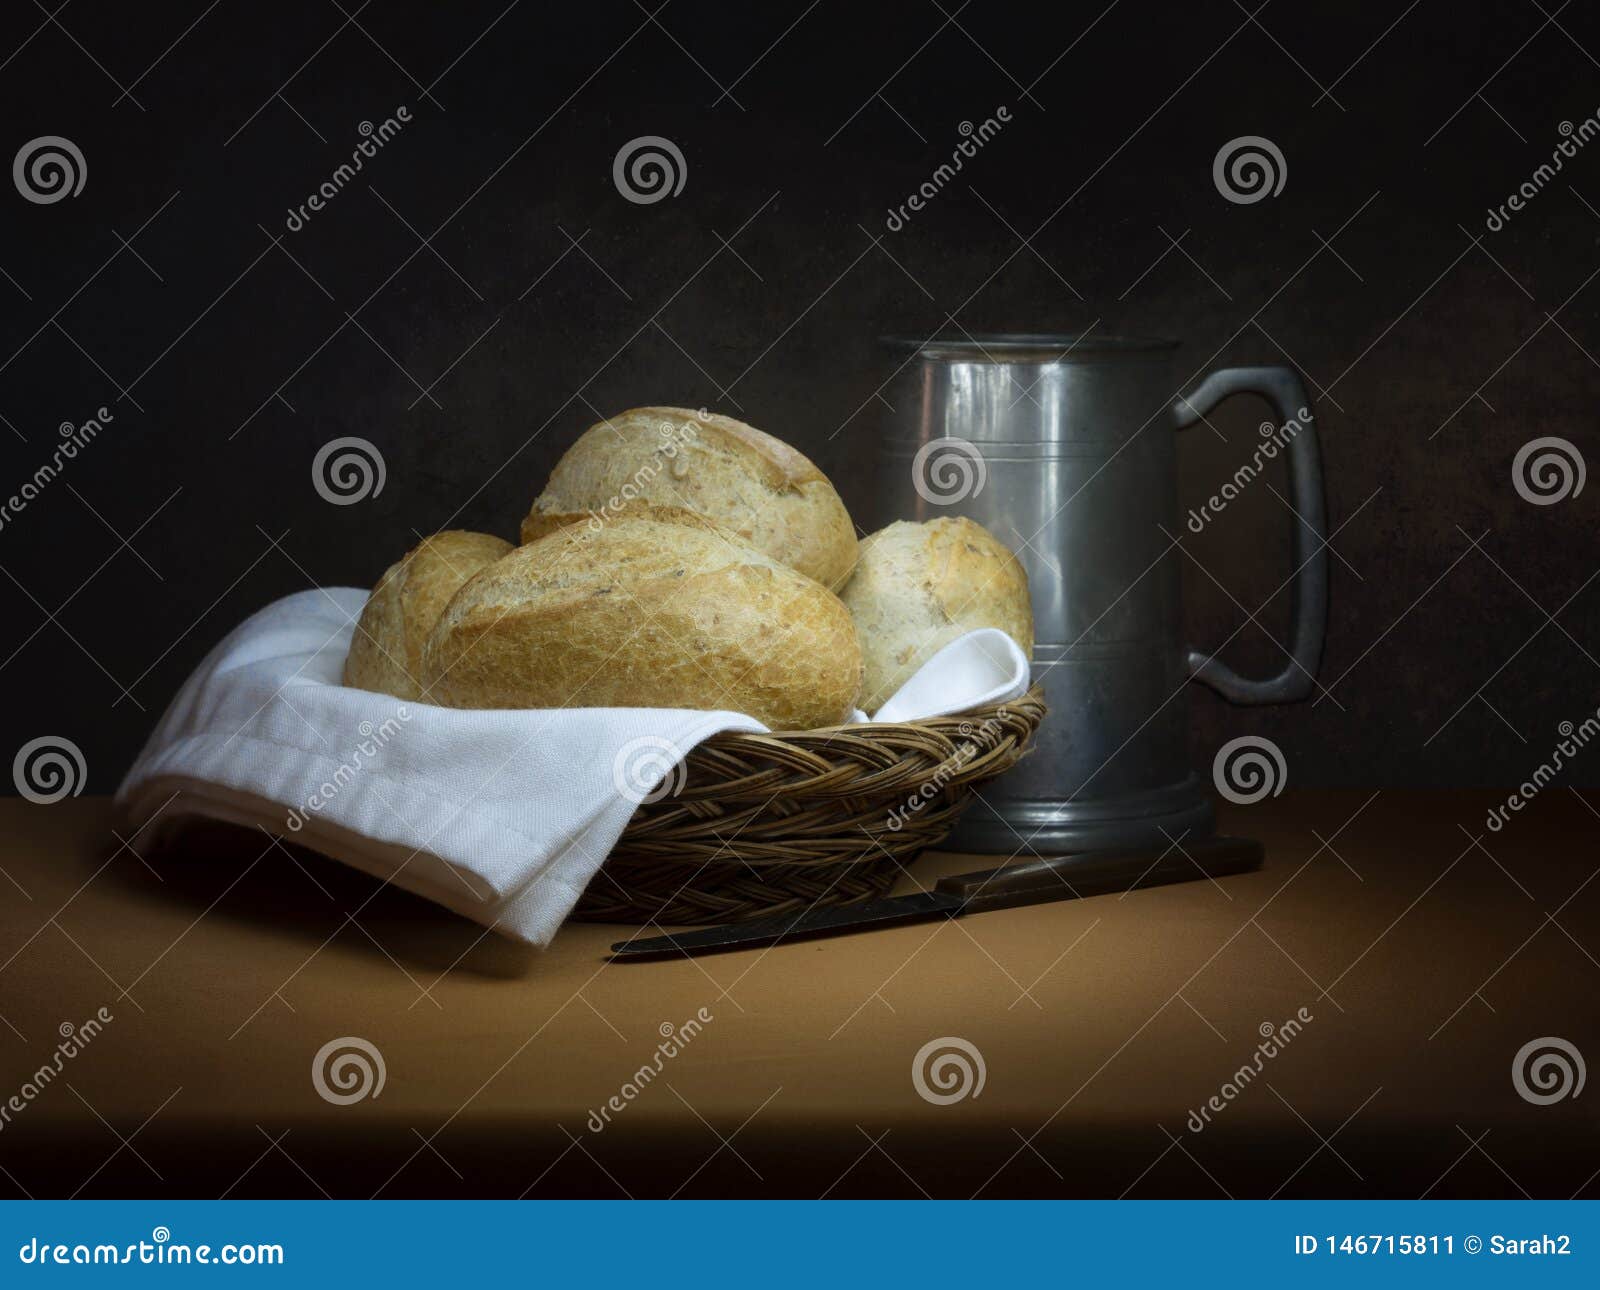 bread and ale, rustic lunch, with old pewter tankard, bread rolls and knife. painting like chiaroscuro still life.